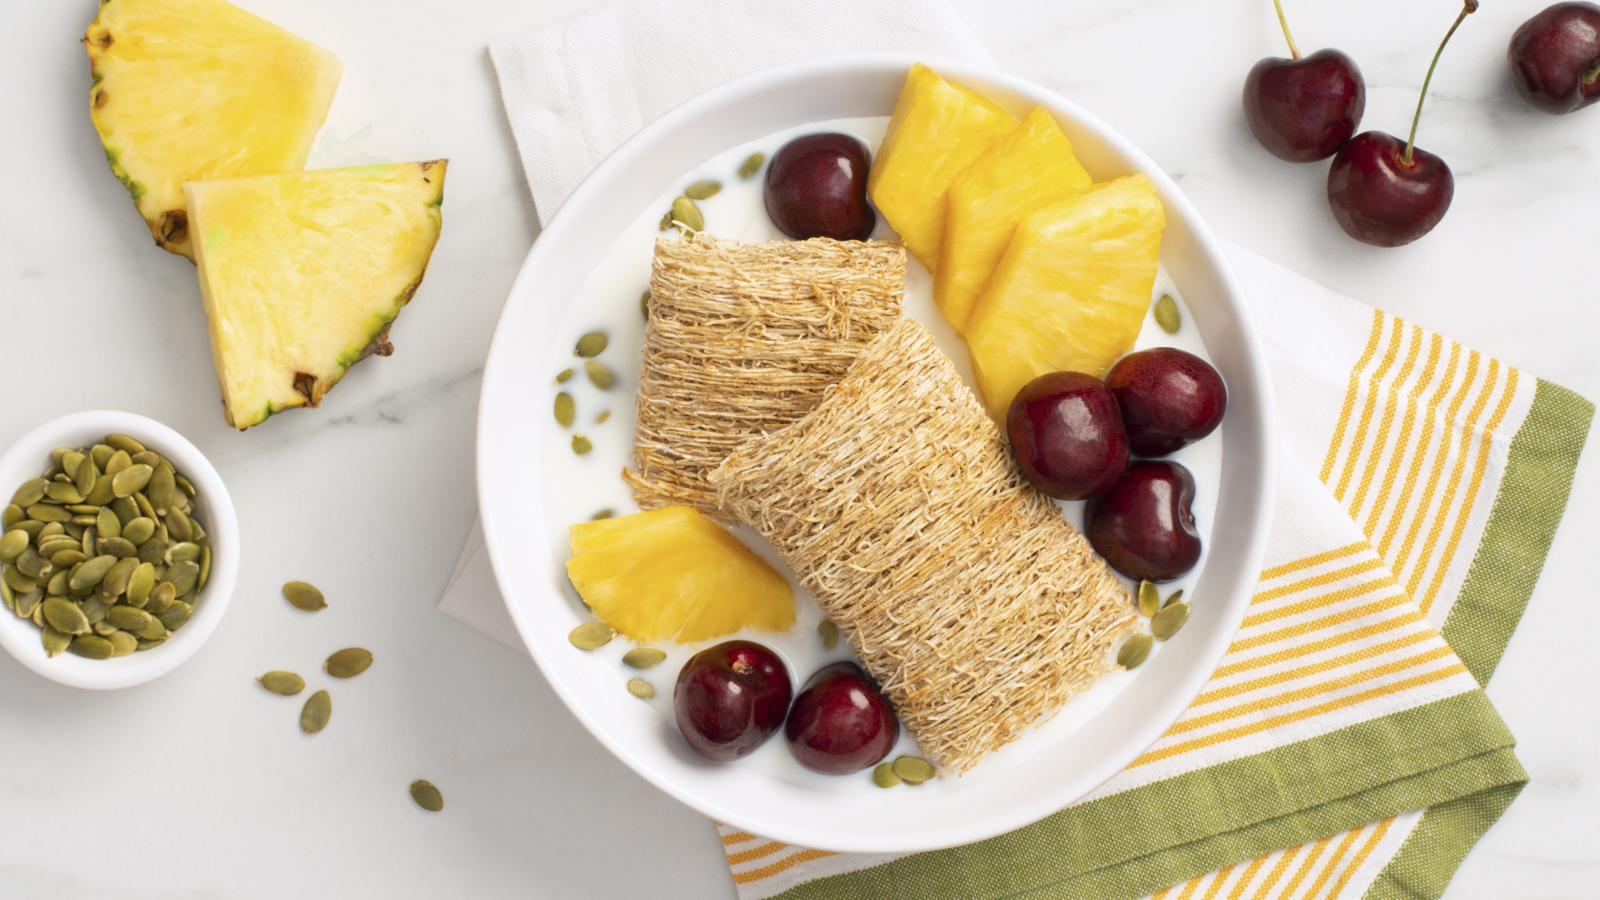 Two Shredded Wheat Biscuits with pineapple slices and cherries.